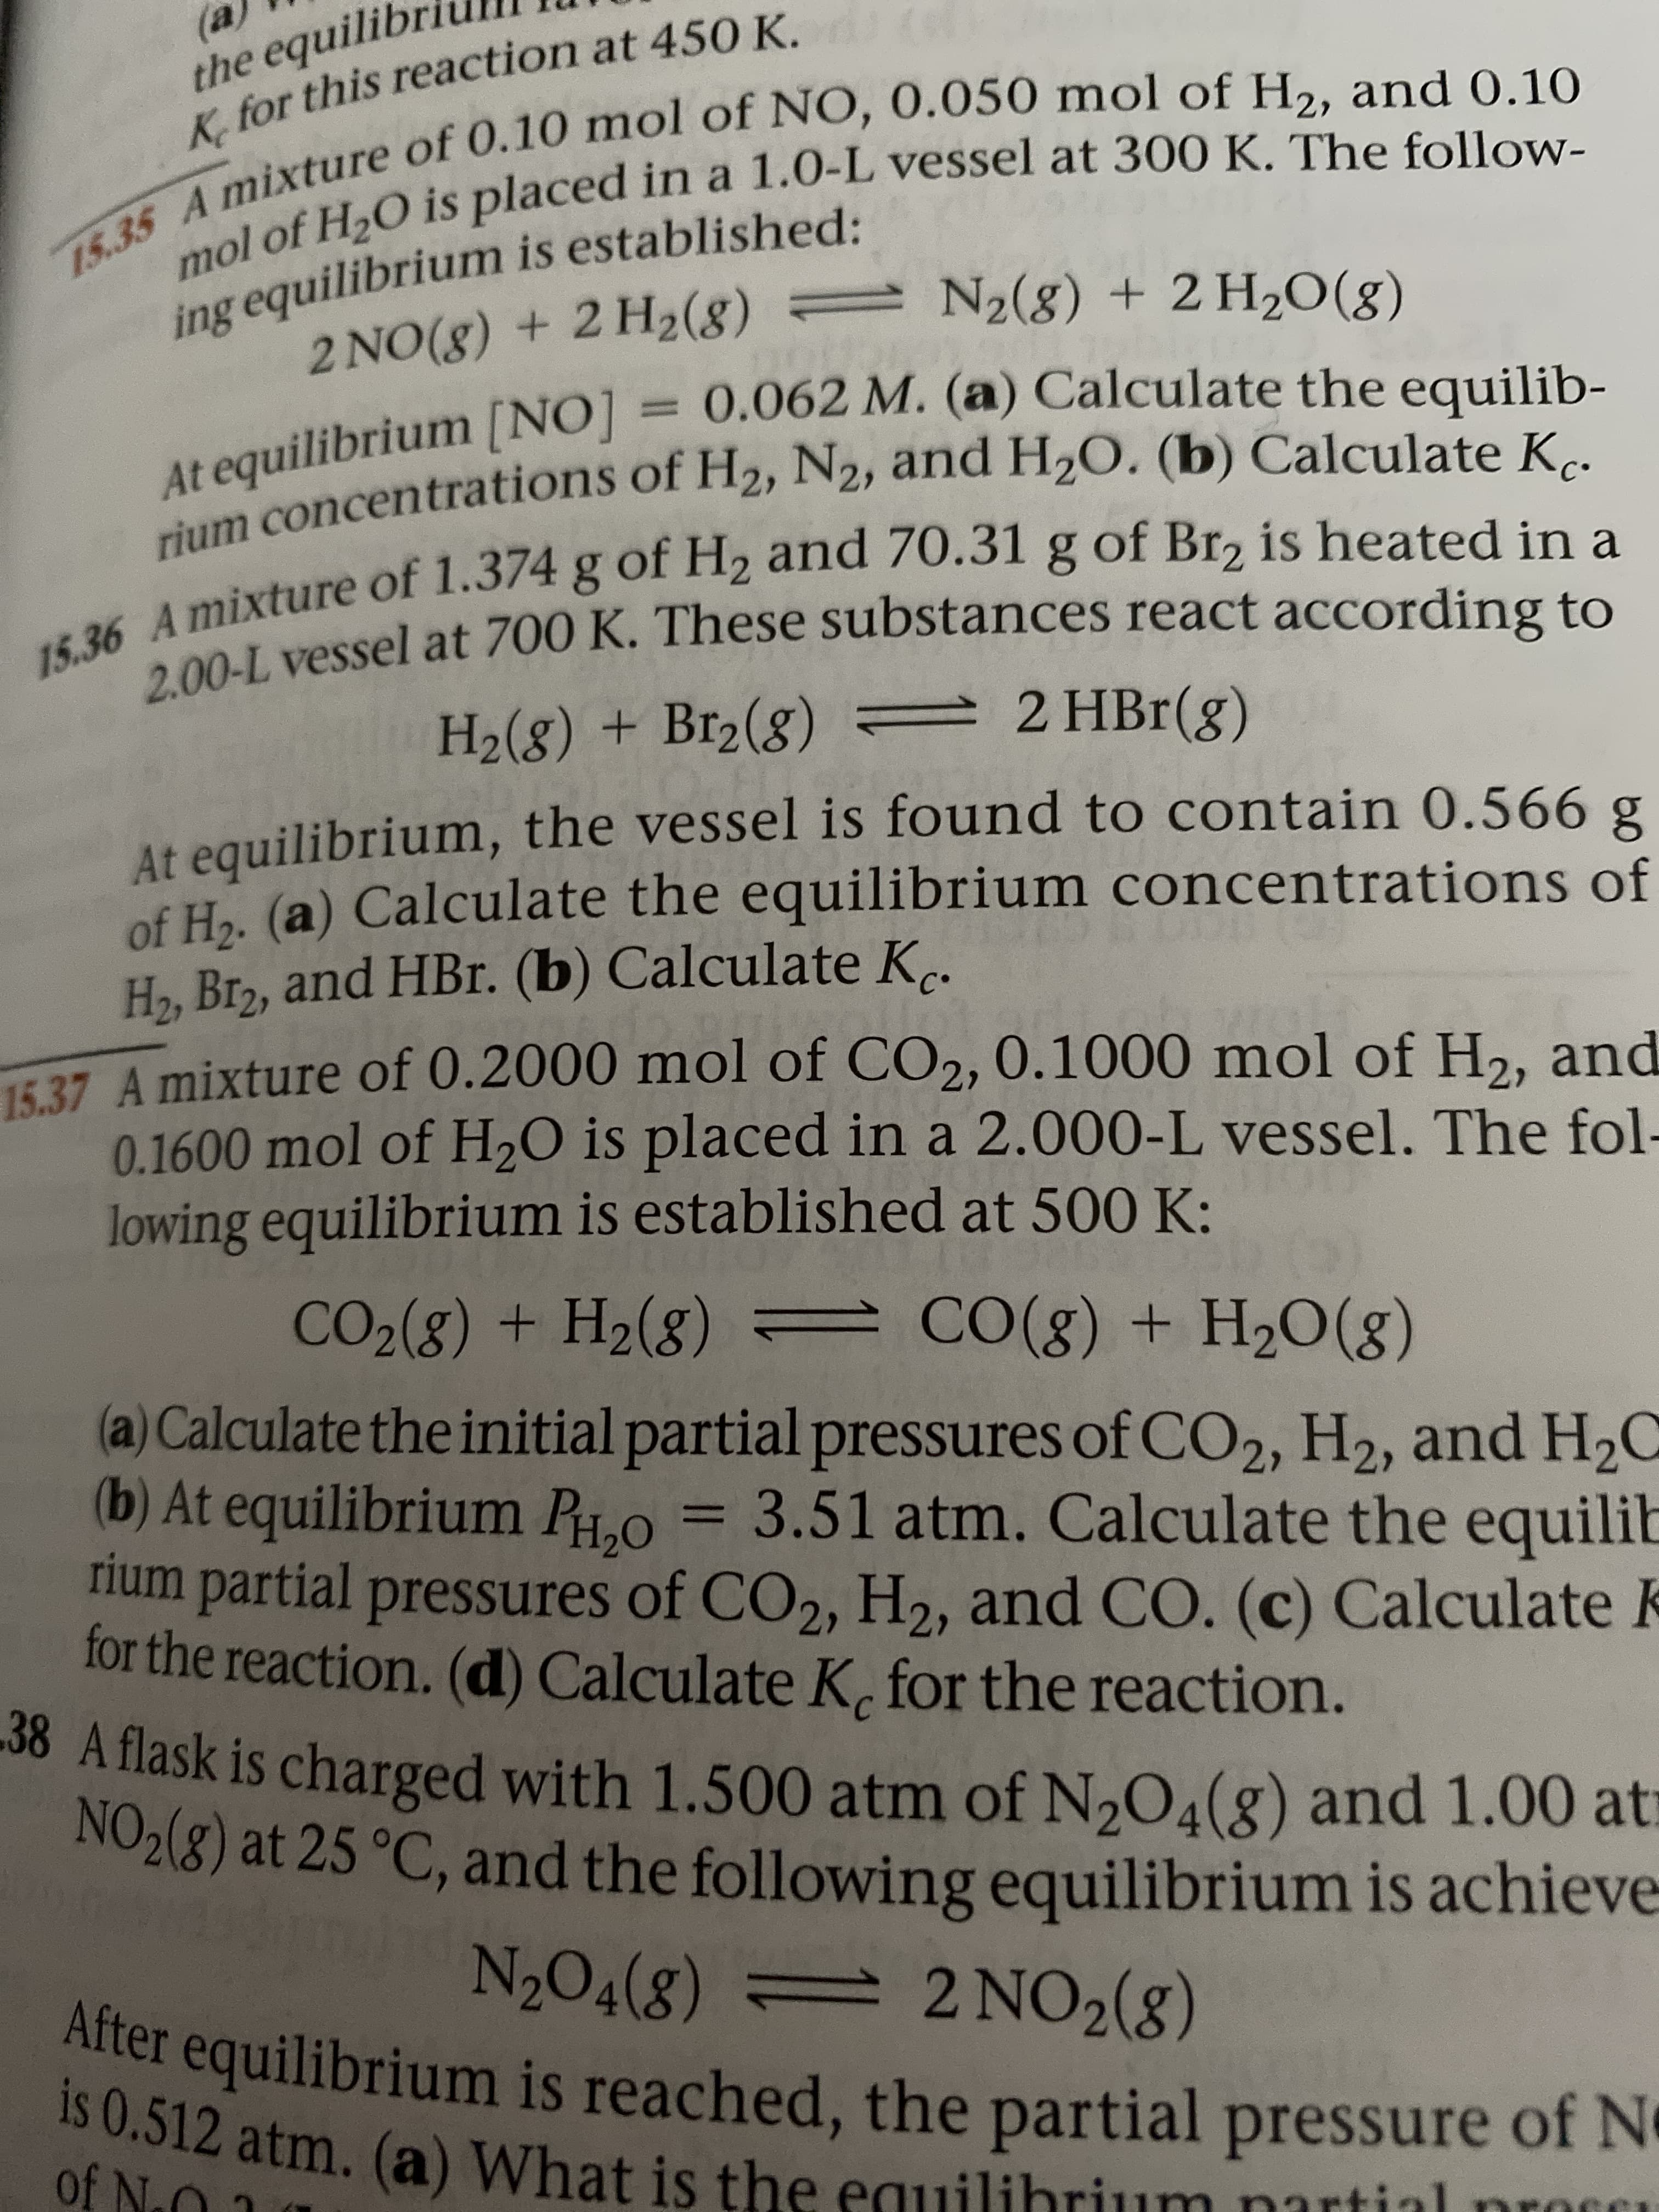 (a
the equilib
K, for this reaction at 450 K.
15.35 A mixture of 0.10 mol of NO, 0.050 mol of H2, and 0.10
ing equilibrium is established:
mol of H2O is placed in a 1.0-L vessel at 300 K. The follow-
2 NO(8) + 2 H2(8) = N2(8) + 2 H2O(g)
t equilibrium [NO] = 0.062 M. (a) Calculate the equilib-
rium concentrations of H2, N2, and H2O. (b) Calculate Kc.
mixture of 1.374 g of H2 and 70.31 g of Br2 is heated in a
2.00-L vessel at 700 K. These substances react according to
H2(g) + Br2(8) 2 HBr(g)
At equilibrium, the vessel is found to contain 0.566 g
of Ho. (a) Calculate the equilibrium concentrations of
H2, Br2, and HBr. (b) Calculate K..
15.37 A mixture of 0.2000 mol of CO2, 0.1000 mol of H2, and
0.1600 mol of H,O is placed in a 2.000-L vessel. The fol-
lowing equilibrium is established at 500 K:
CO2(8) + H2(8)
CO(g) + H20(g)
(a) Calculate the initial partial pressures of CO2, H2, and H2C
(b) At equilibrium P0 = 3.51 atm. Calculate the equilit
rium partial pressures of CO2, H2, and CO. (c) Calculate k
for the reaction. (d) Calculate K, for the reaction.
38 A flask is charged with 1.500 atm of N,O4(g) and 1.00 atı
NO2(8) at 25 °C, and the following equilibrium is achieve
N2O4(8) = 2 NO2(g)
= 2 NO2(8)
After equilibrium is reached, the partial pressure of N
3I2 atm. (a) What is the equilibrium partial proci
of No
